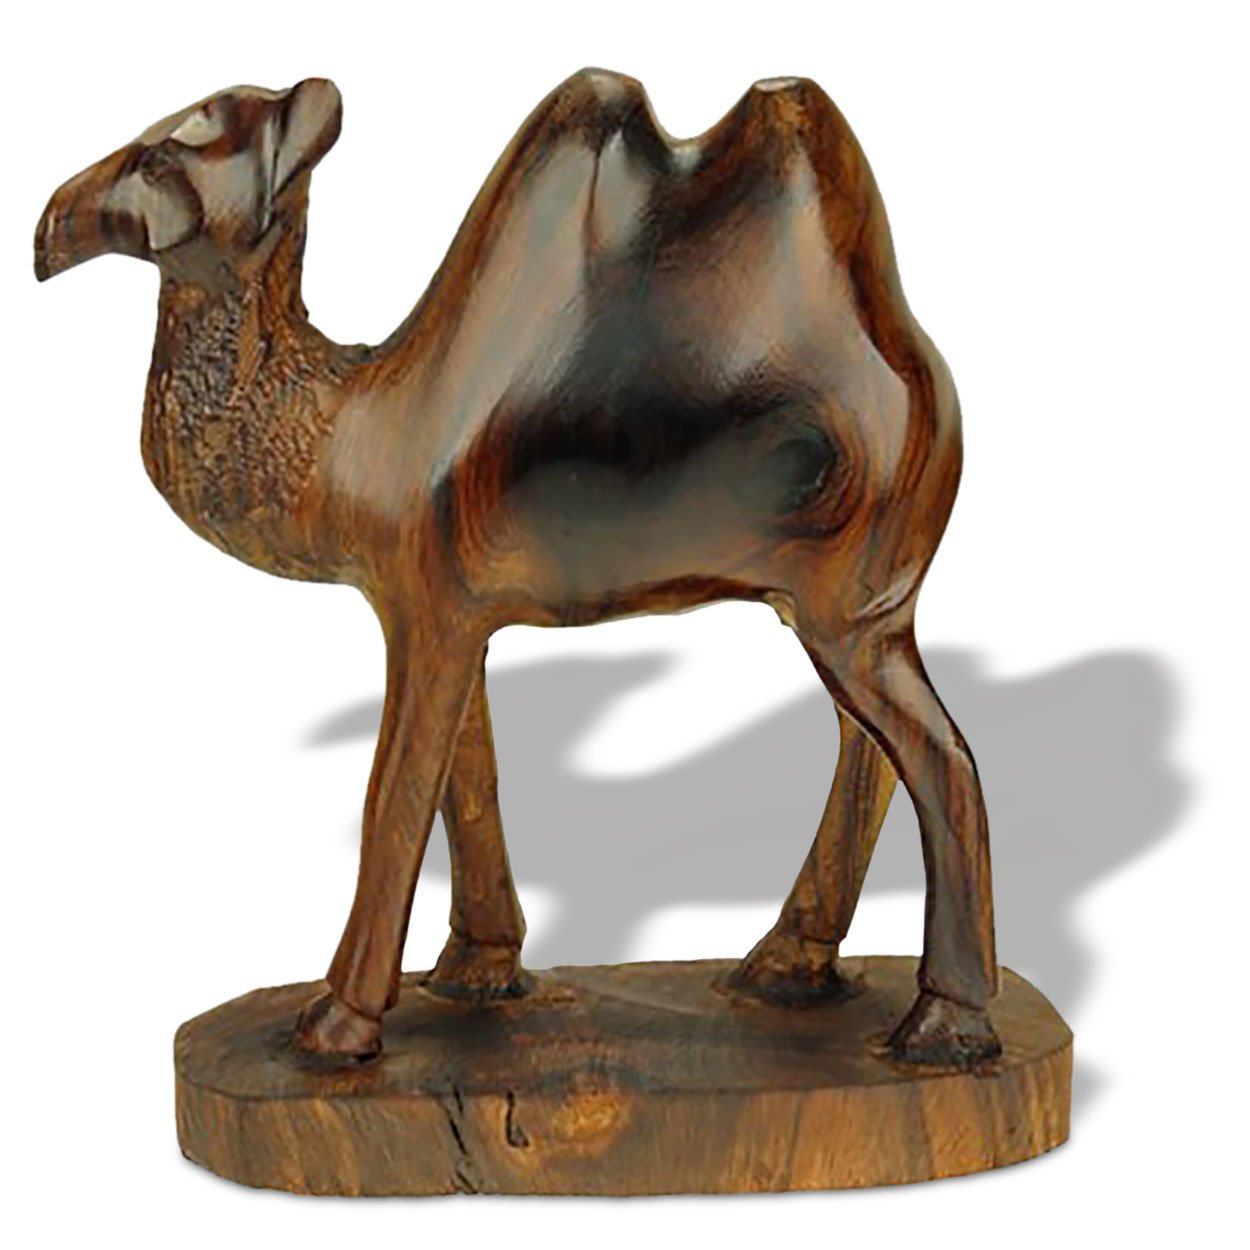 172221 - 6in Tall Dromedary Camel Ironwood Carving on Base